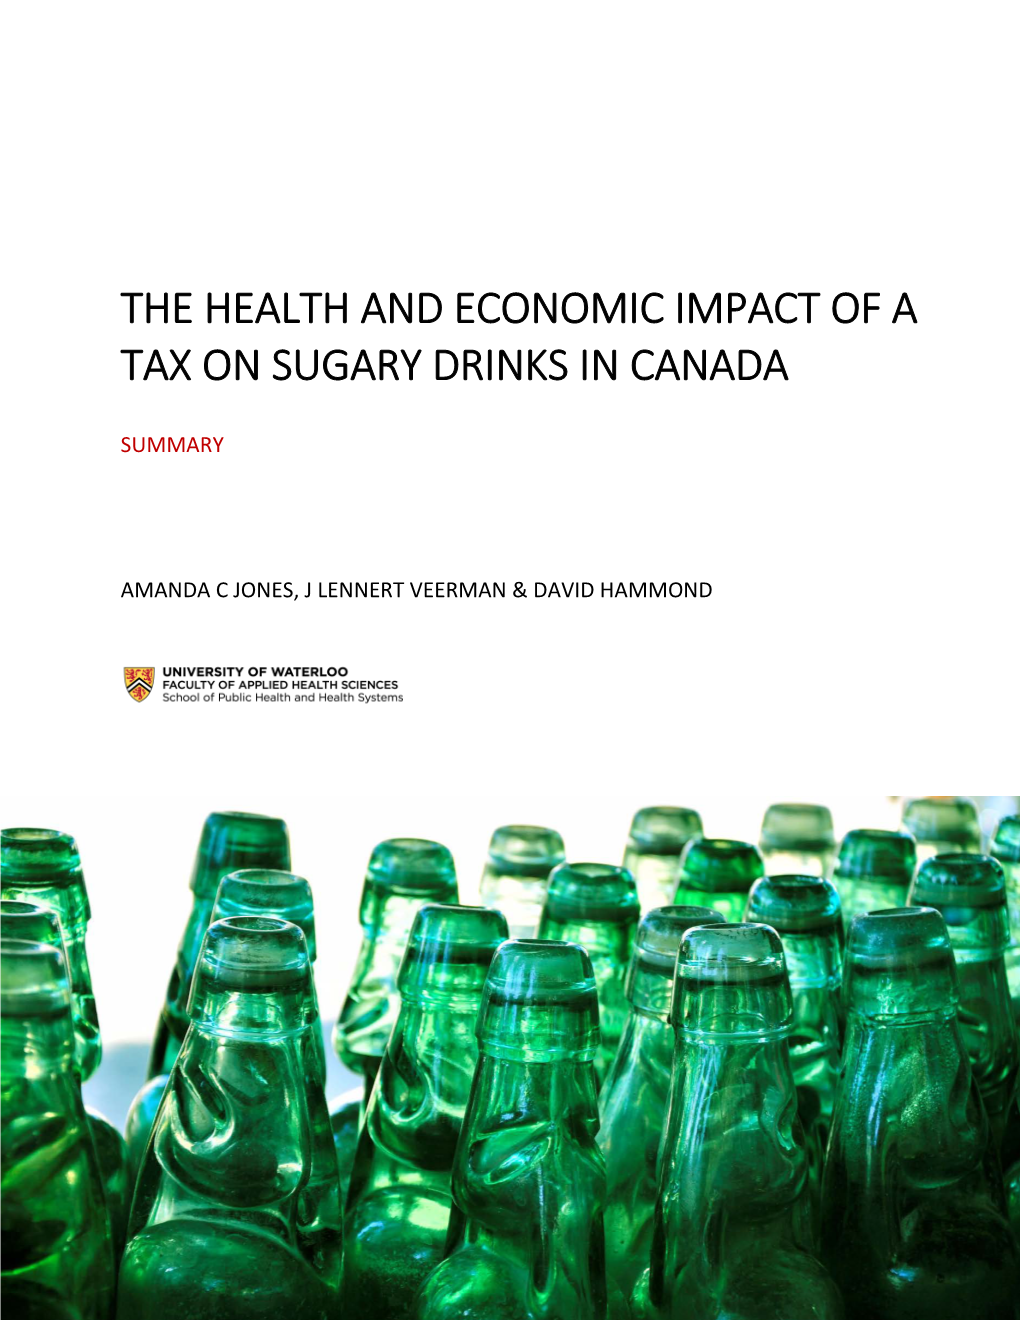 A Tax on Sugary Drinks in Canada